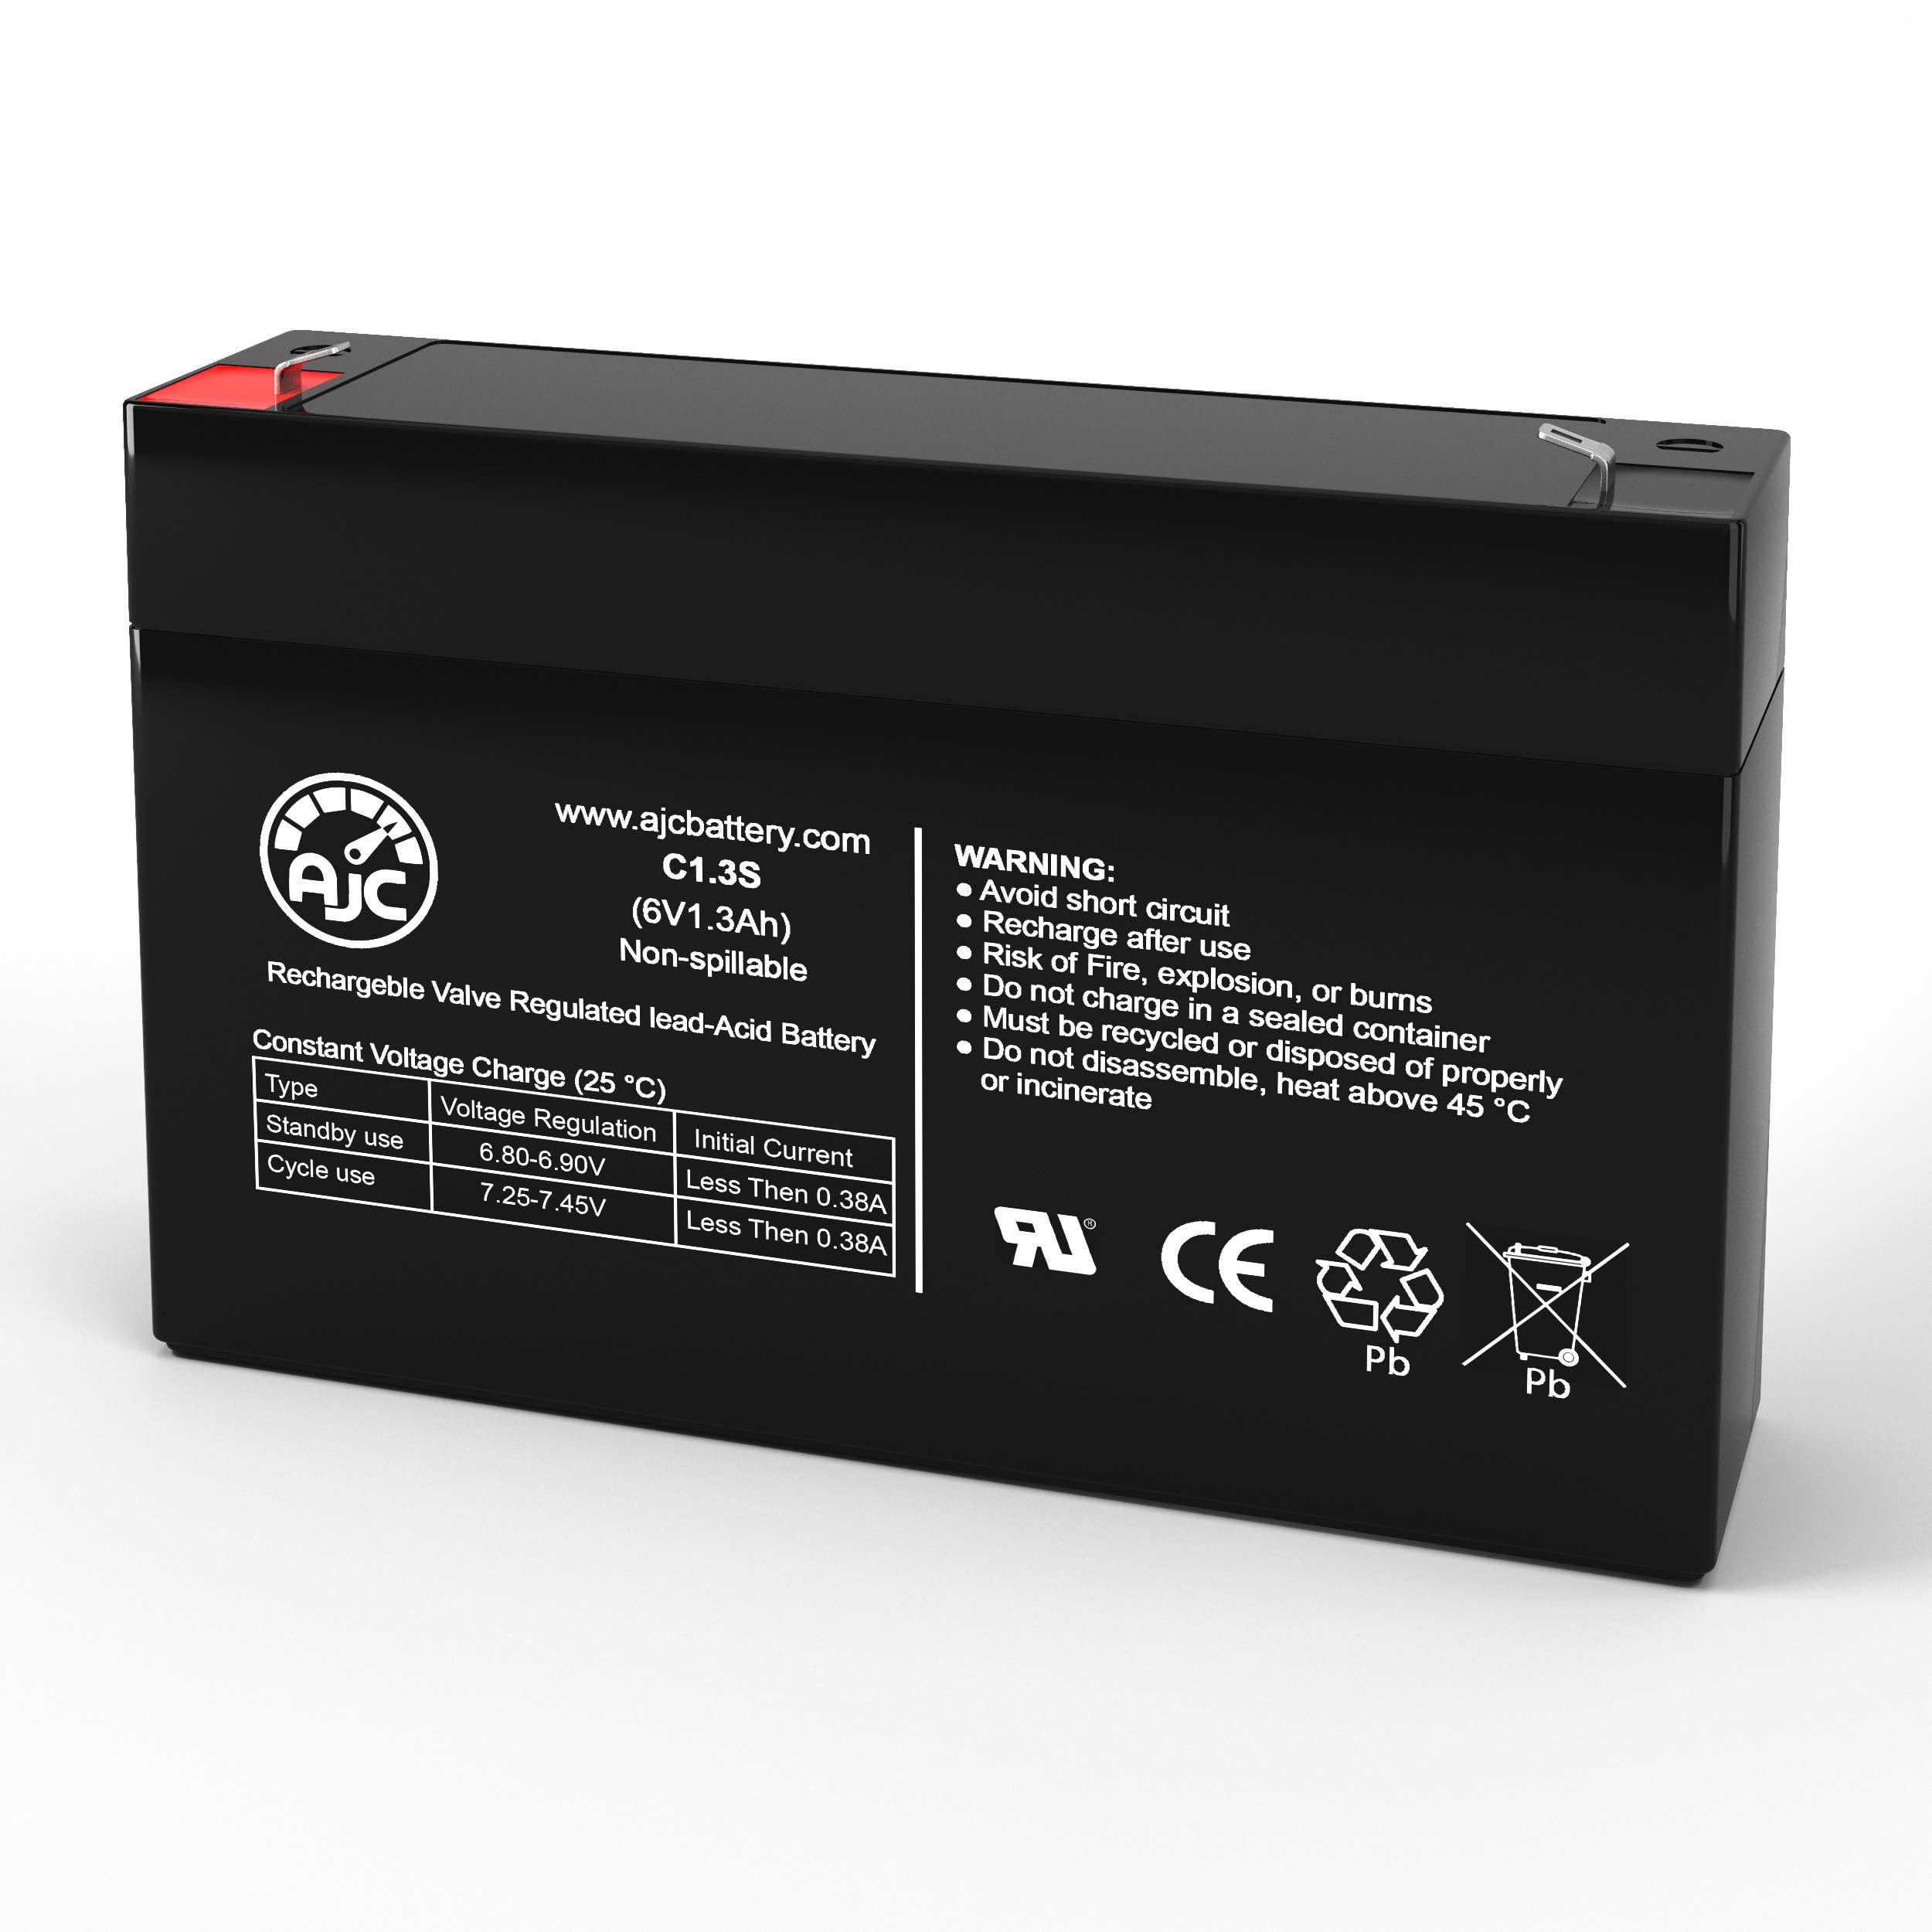 Power Patrol SLA0865 6V 1.3Ah Sealed Lead Acid Battery - This Is an AJC Brand Replacement